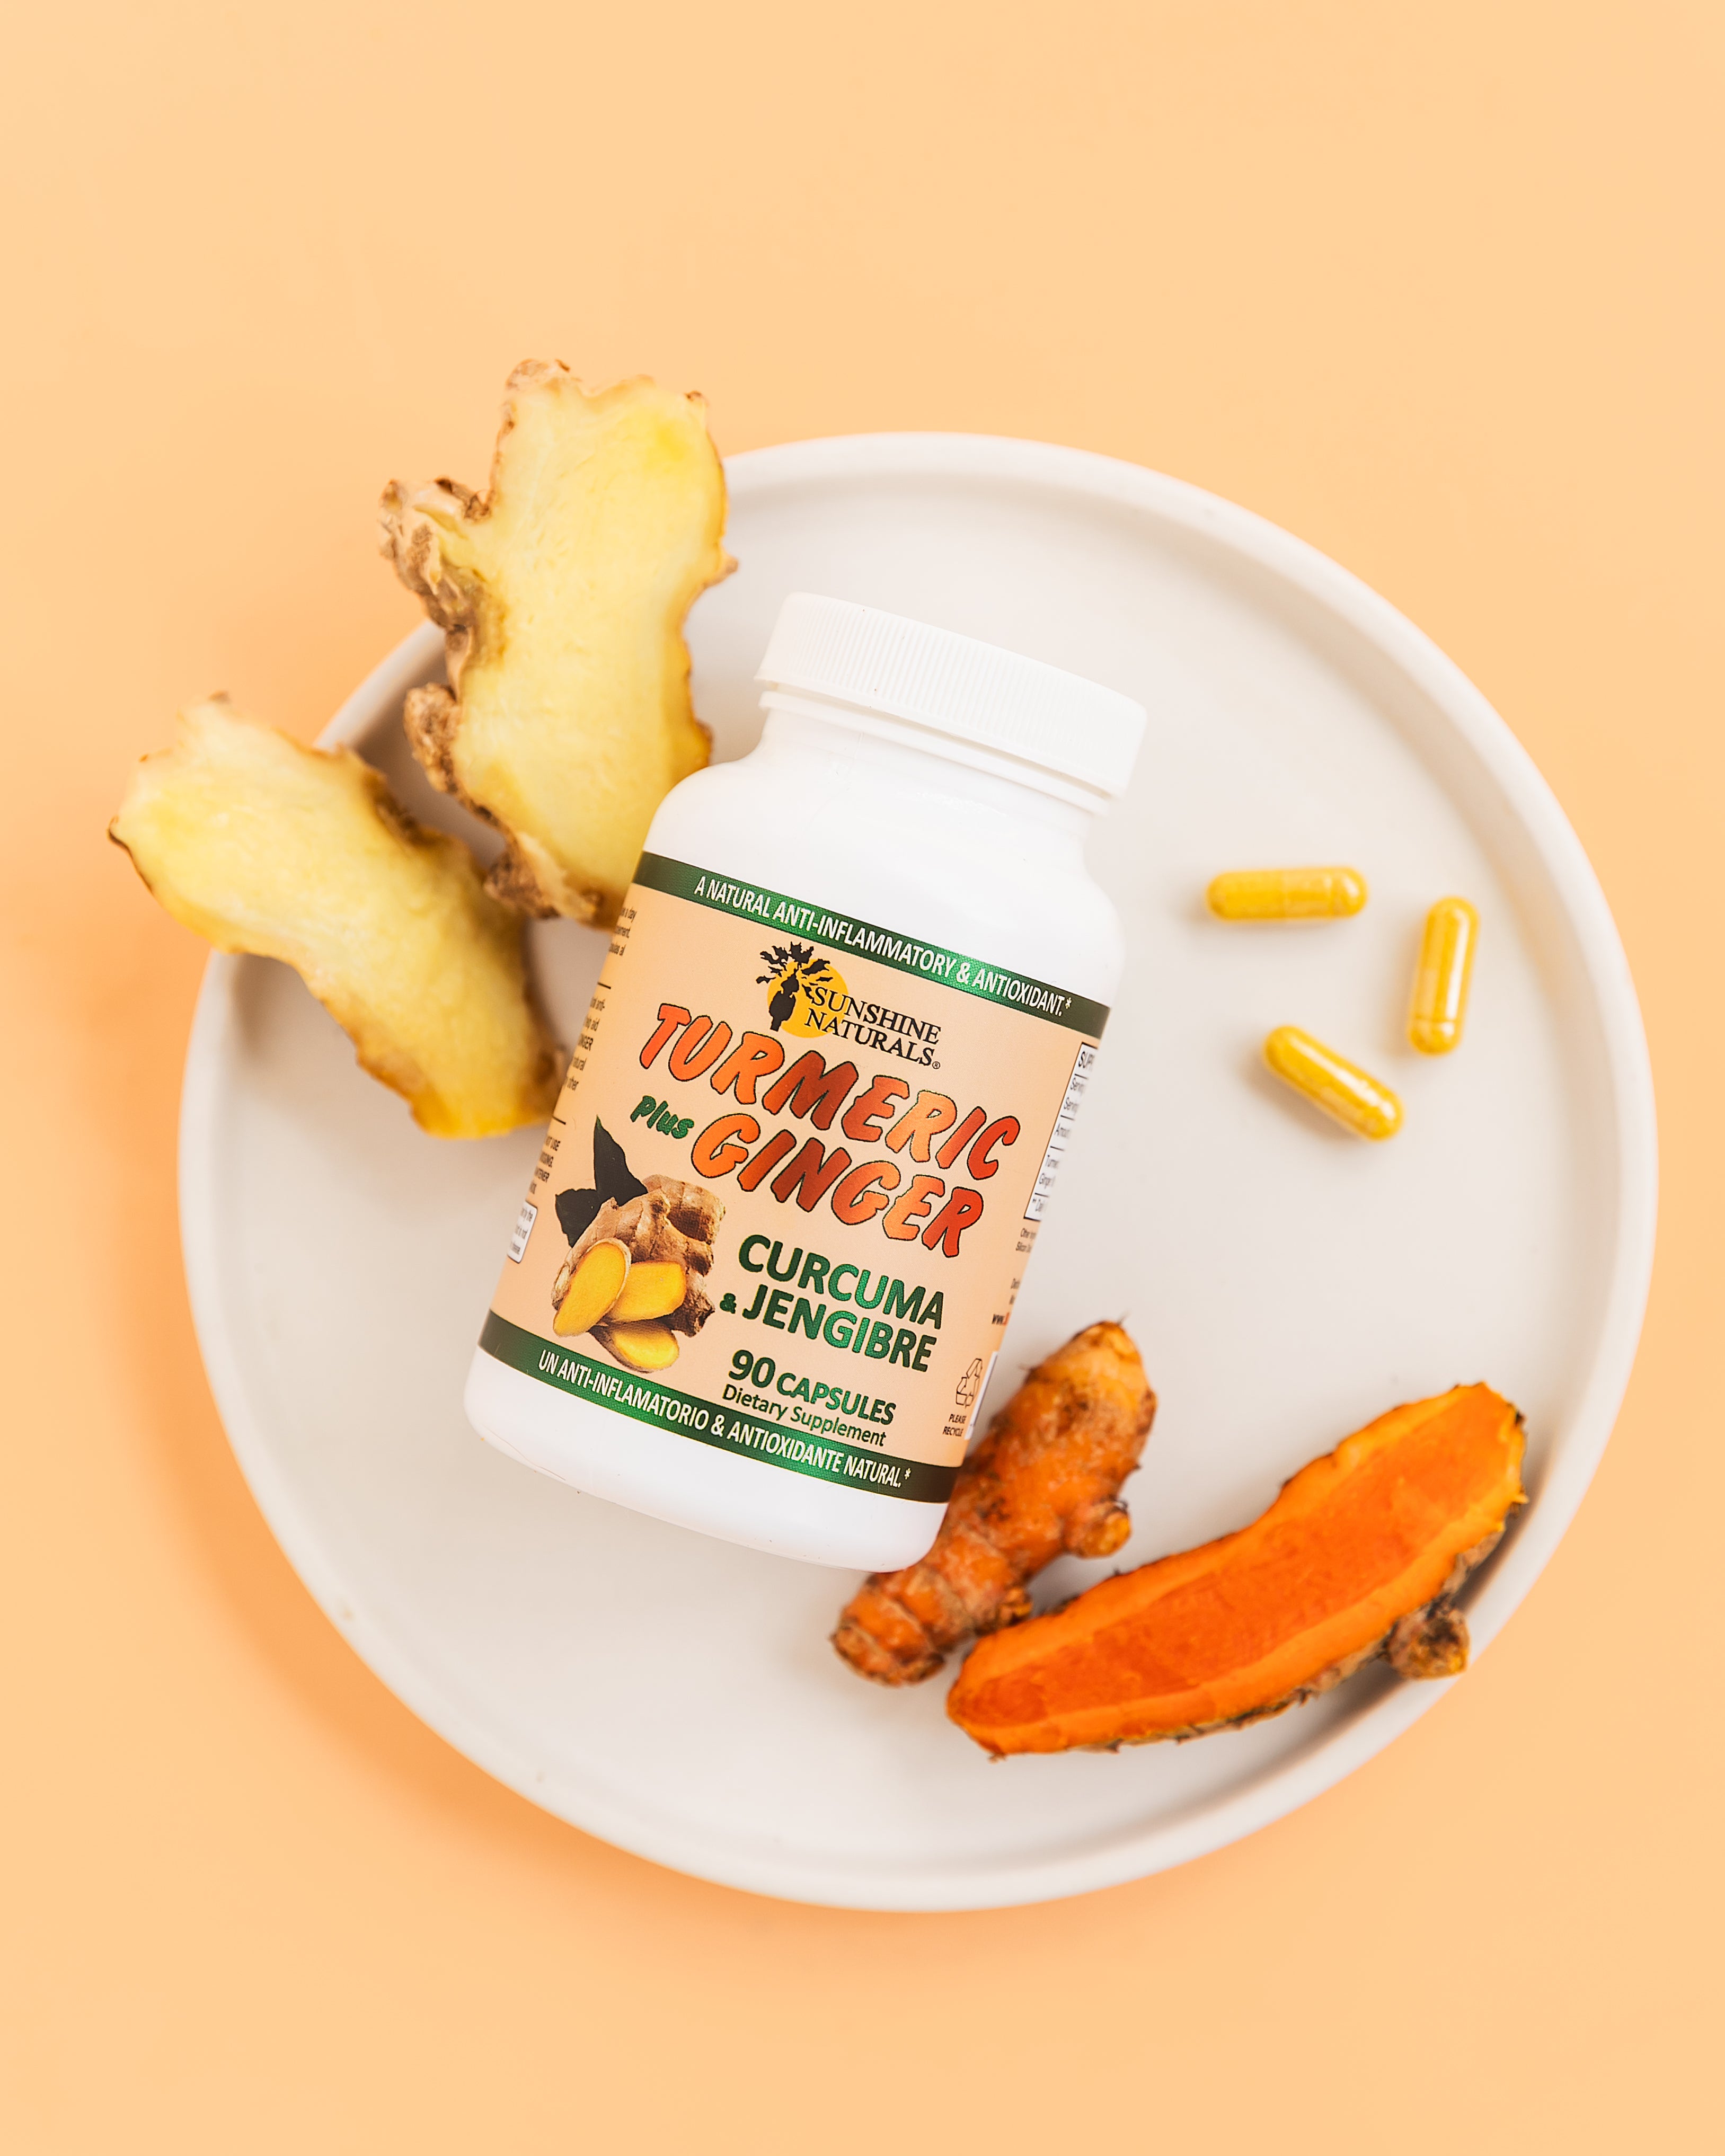 Bottle of Turmeric Supplement suraopunde with natural turmeric and ginger